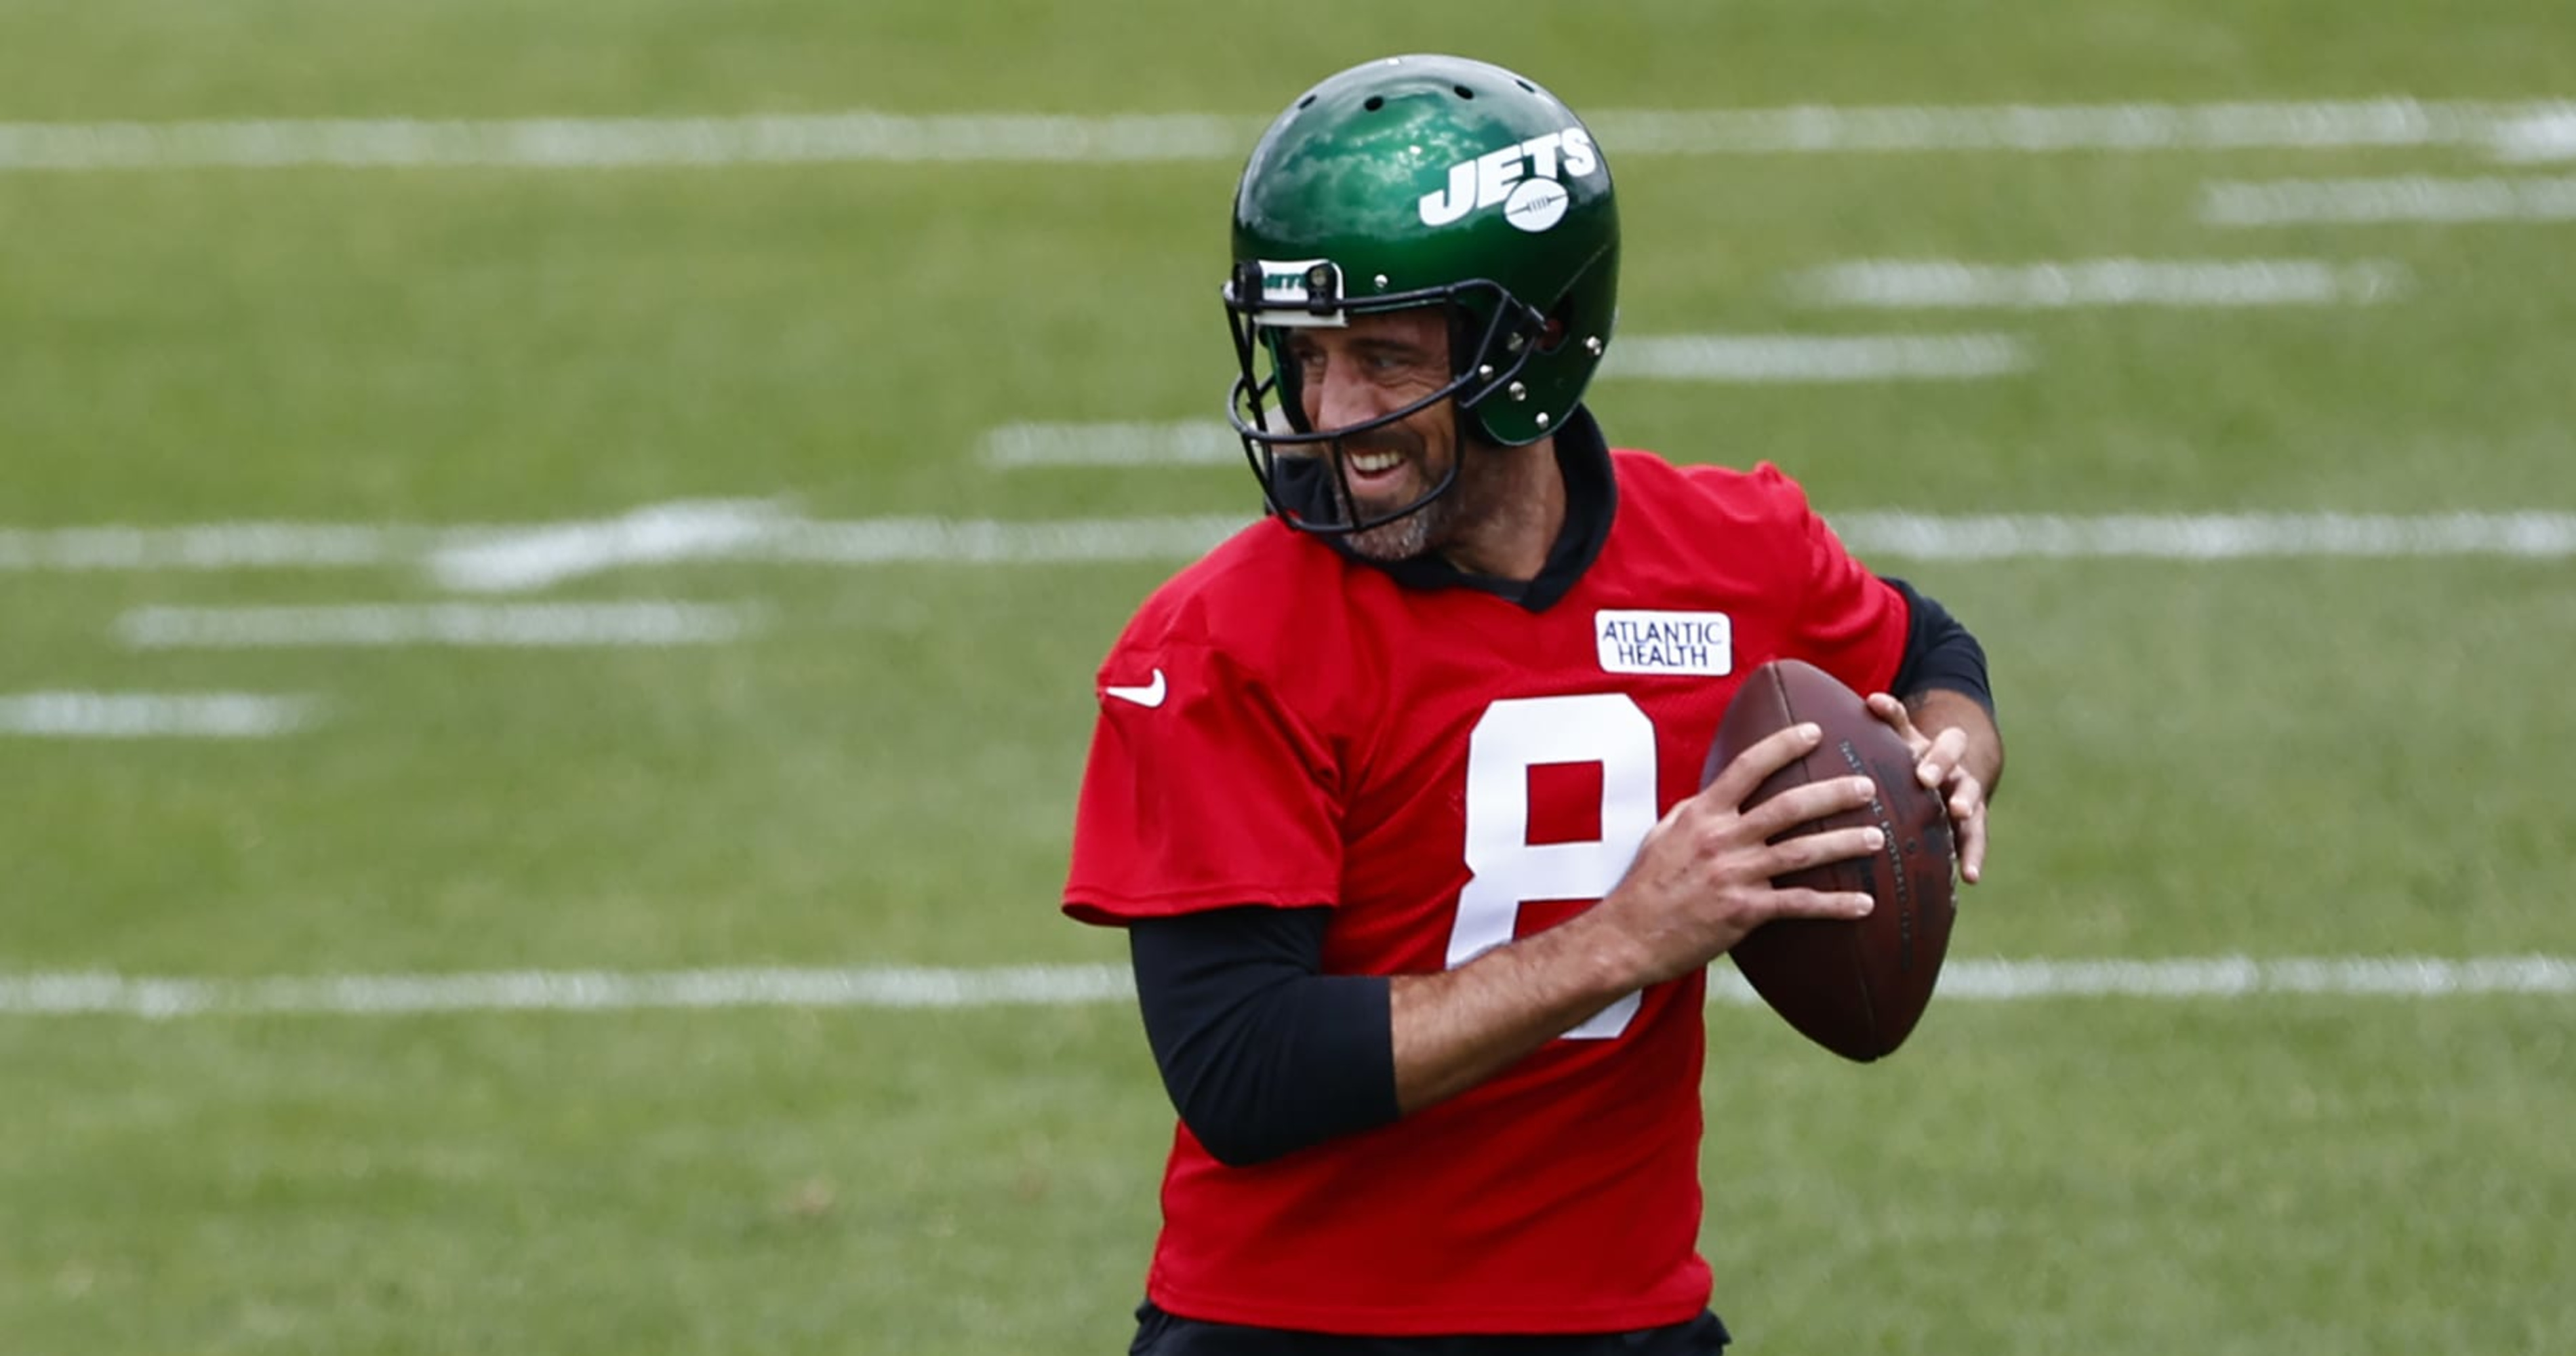 Jets' Aaron Rodgers Shows Off Jacked Physique in Workout Photo Ahead of Camp | News, Scores, Highlights, Stats, and Rumors | Bleacher Report